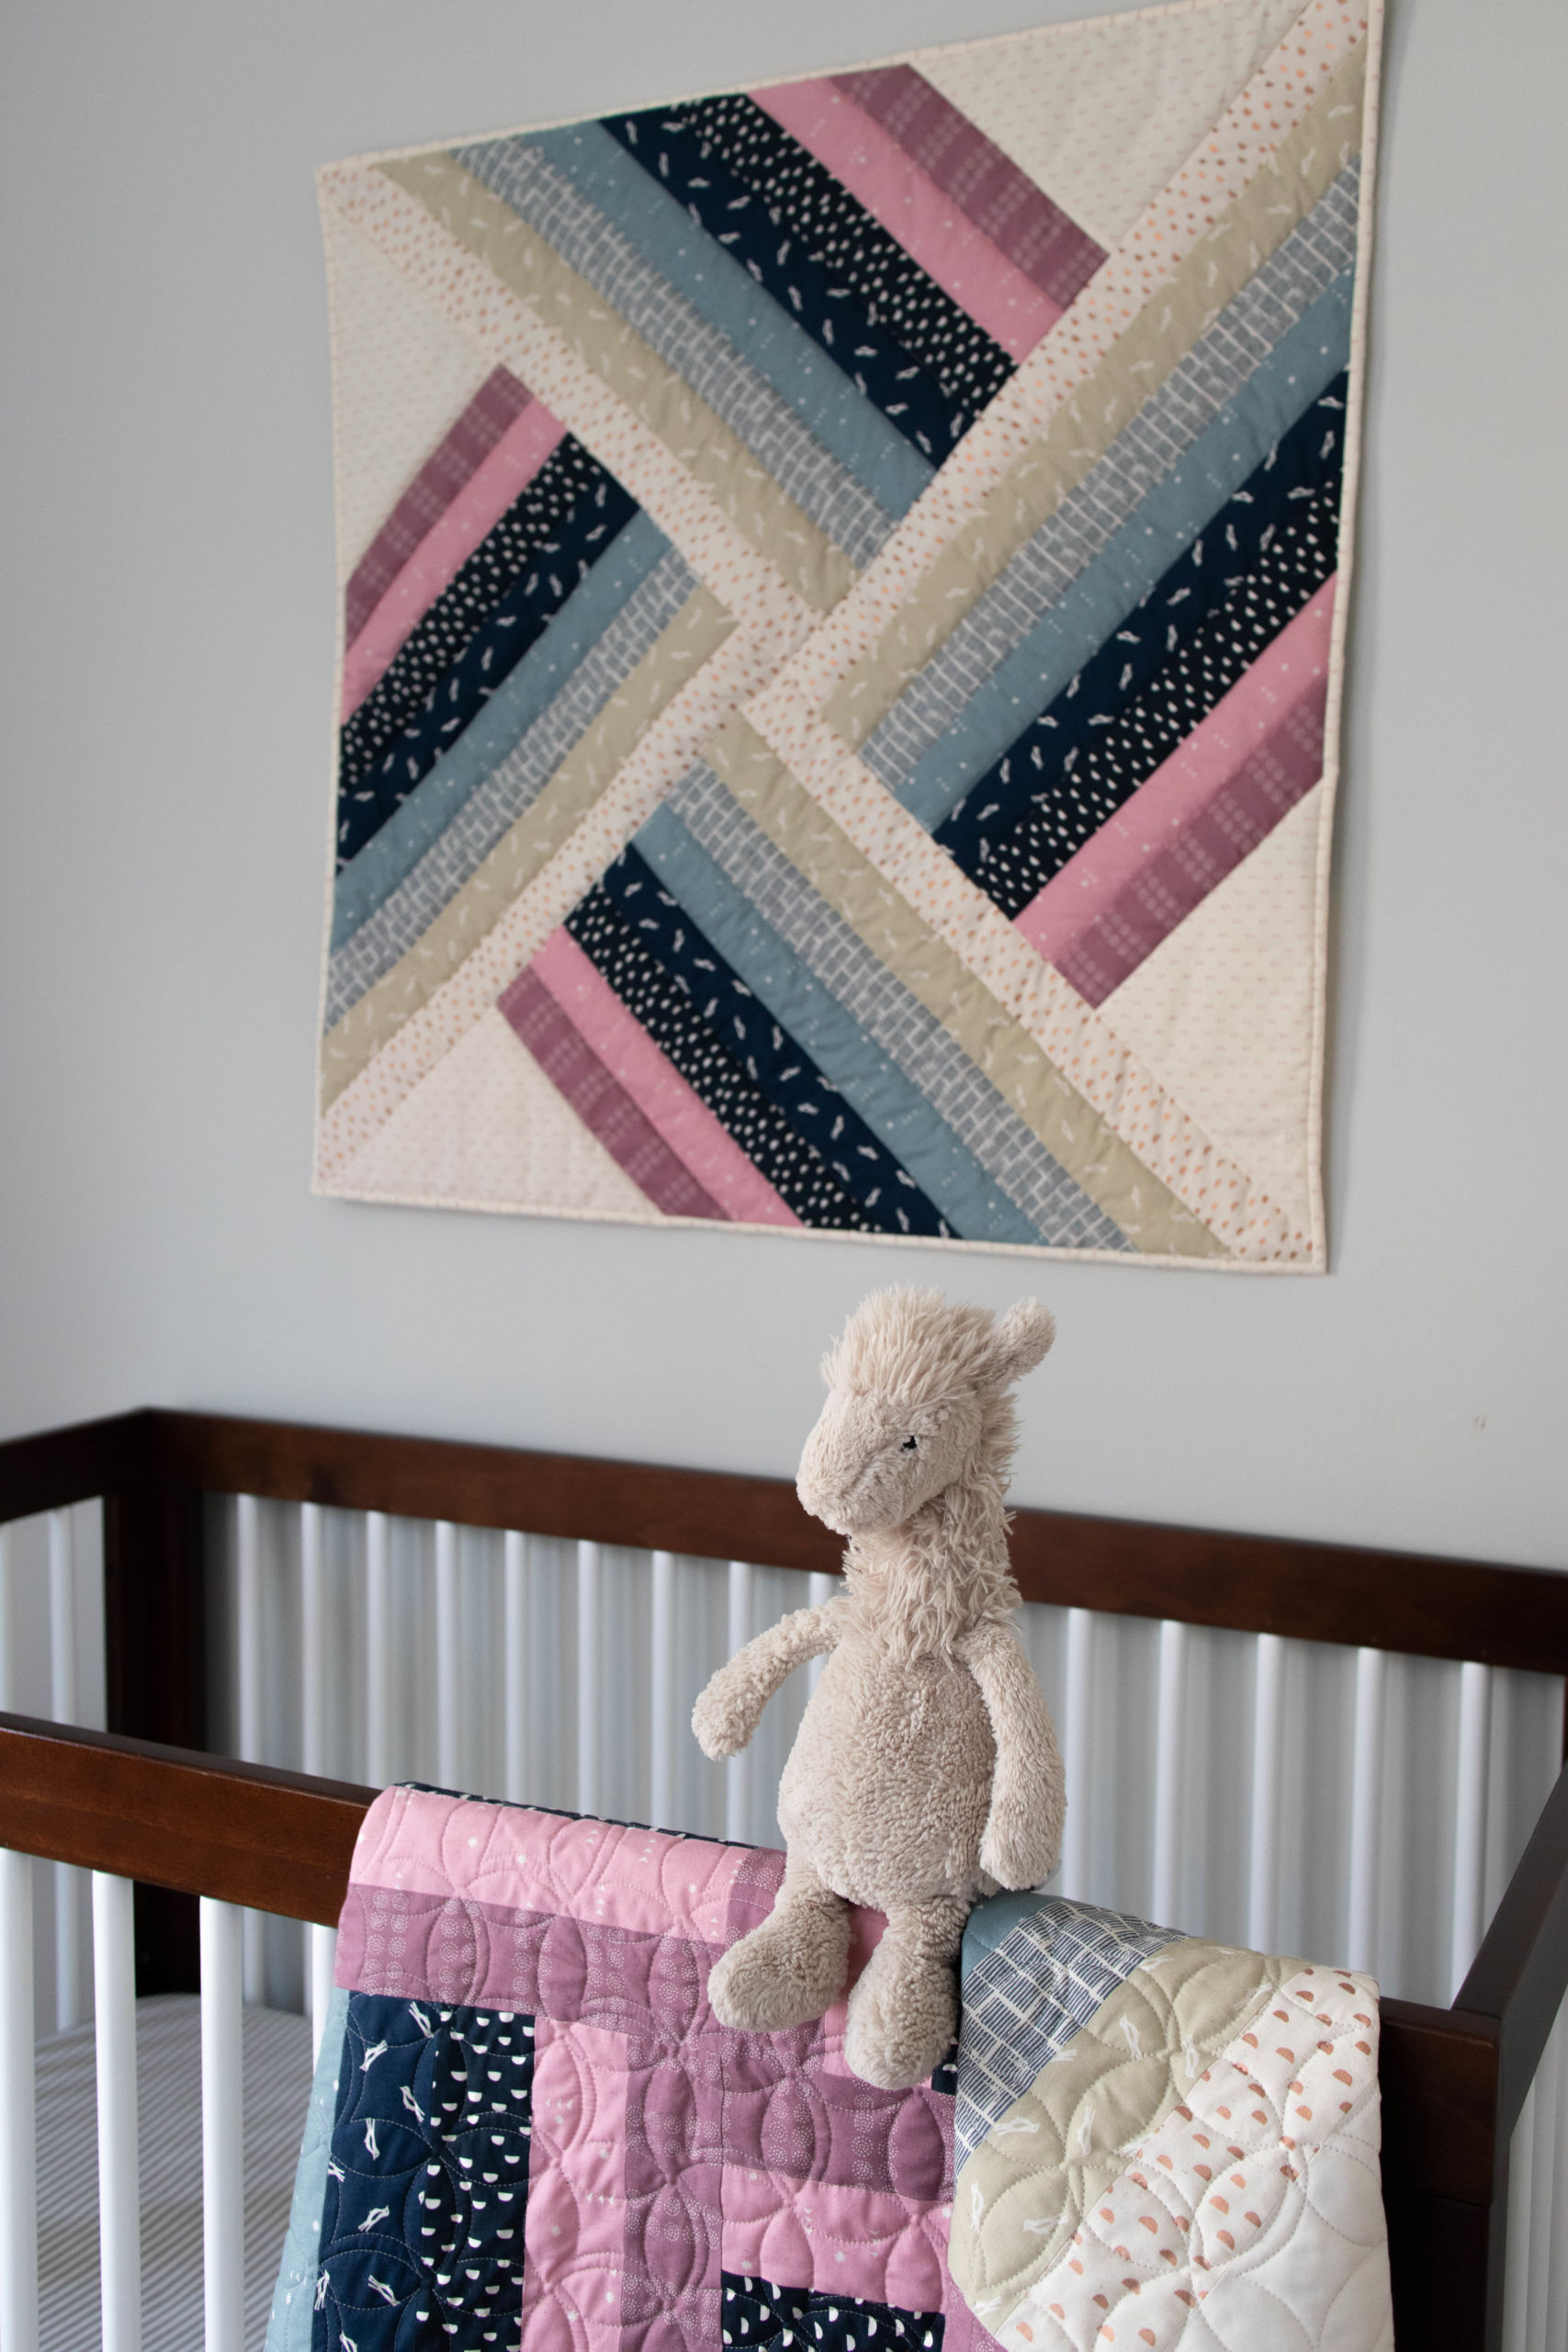 Use your throw and baby sized Adventureland quilt scraps to make creative mini quilts! suzyquilts.com #sewingdiy #quilting